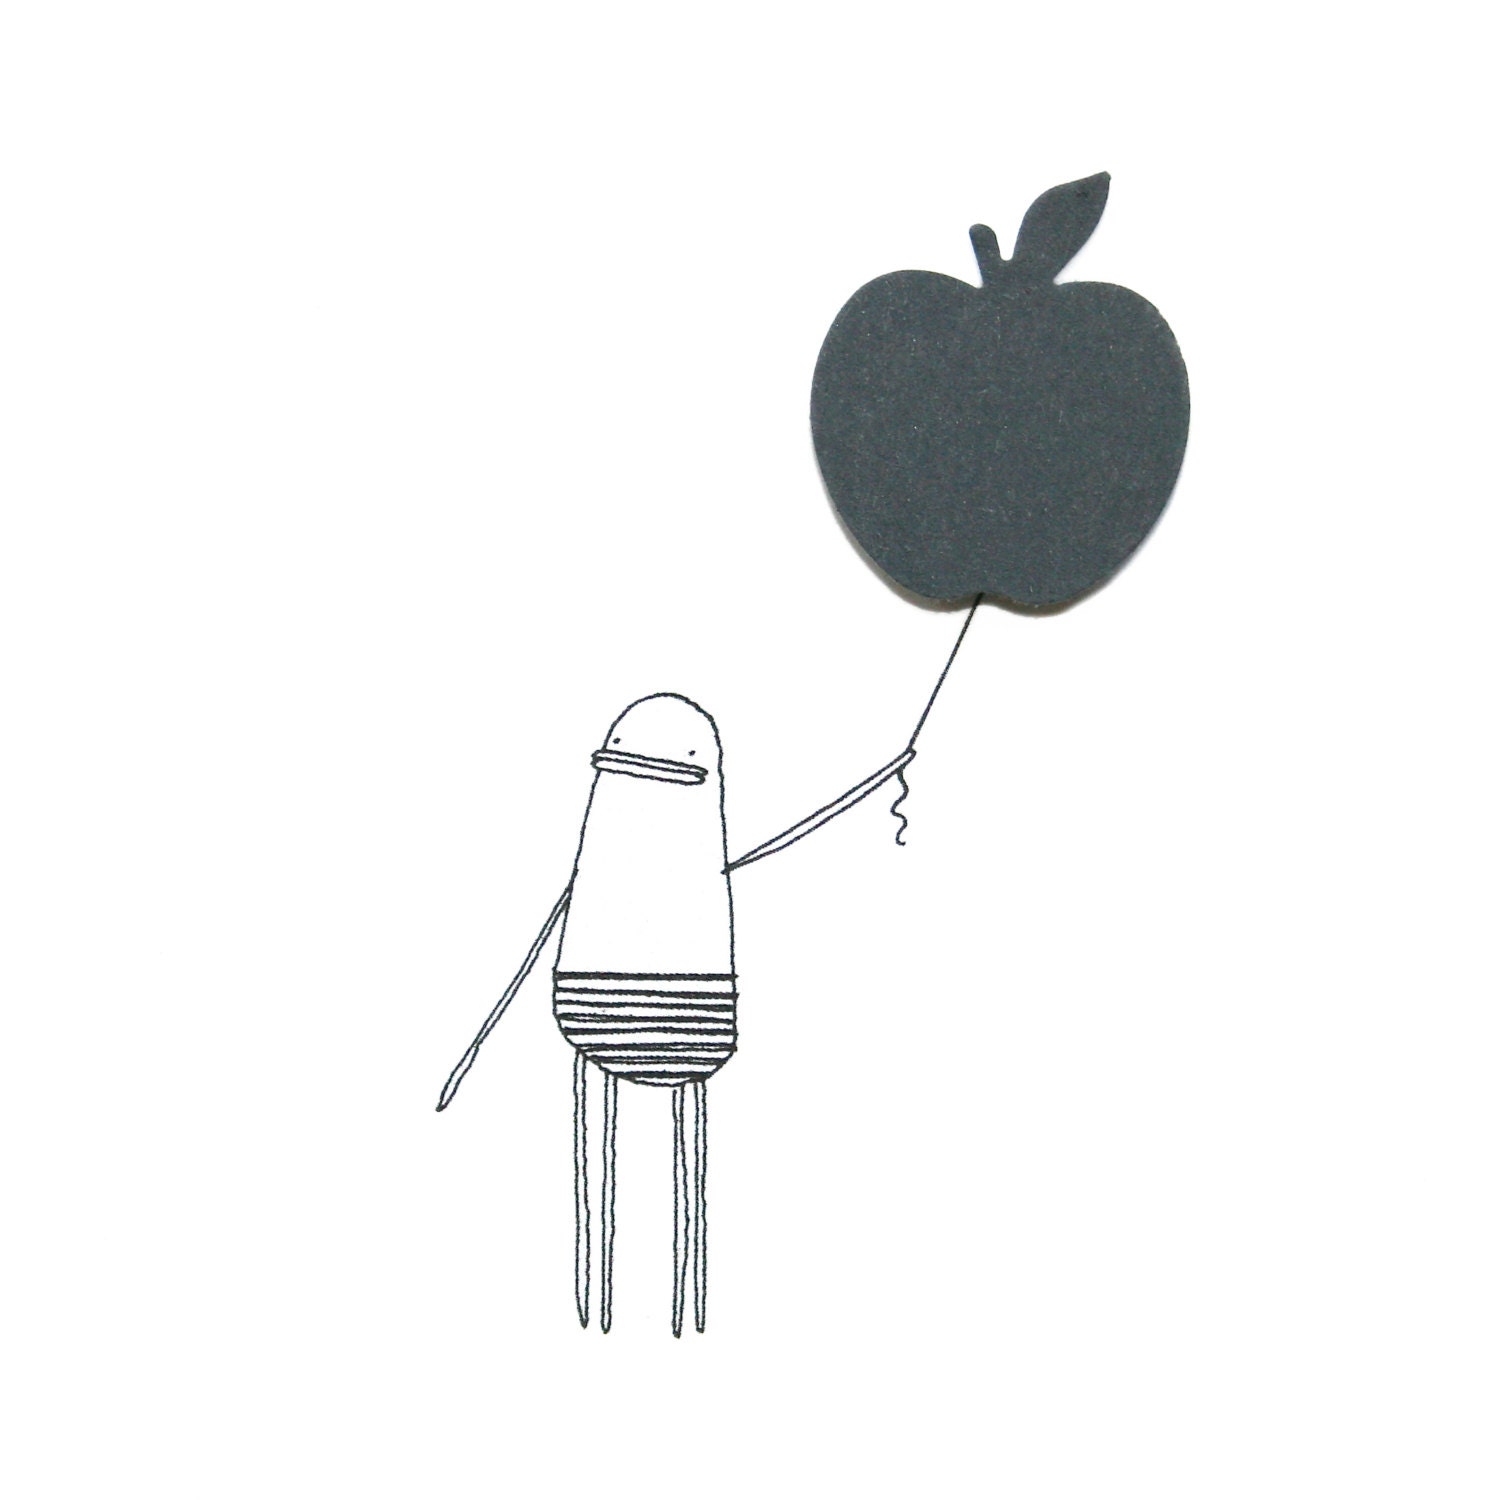 Black Apple Balloon, Cute Birthday Card, Happy Birthday, Hand-Finished, Quirky Illustration of Poosac with Grey Apple Balloon, Black, White - poosac